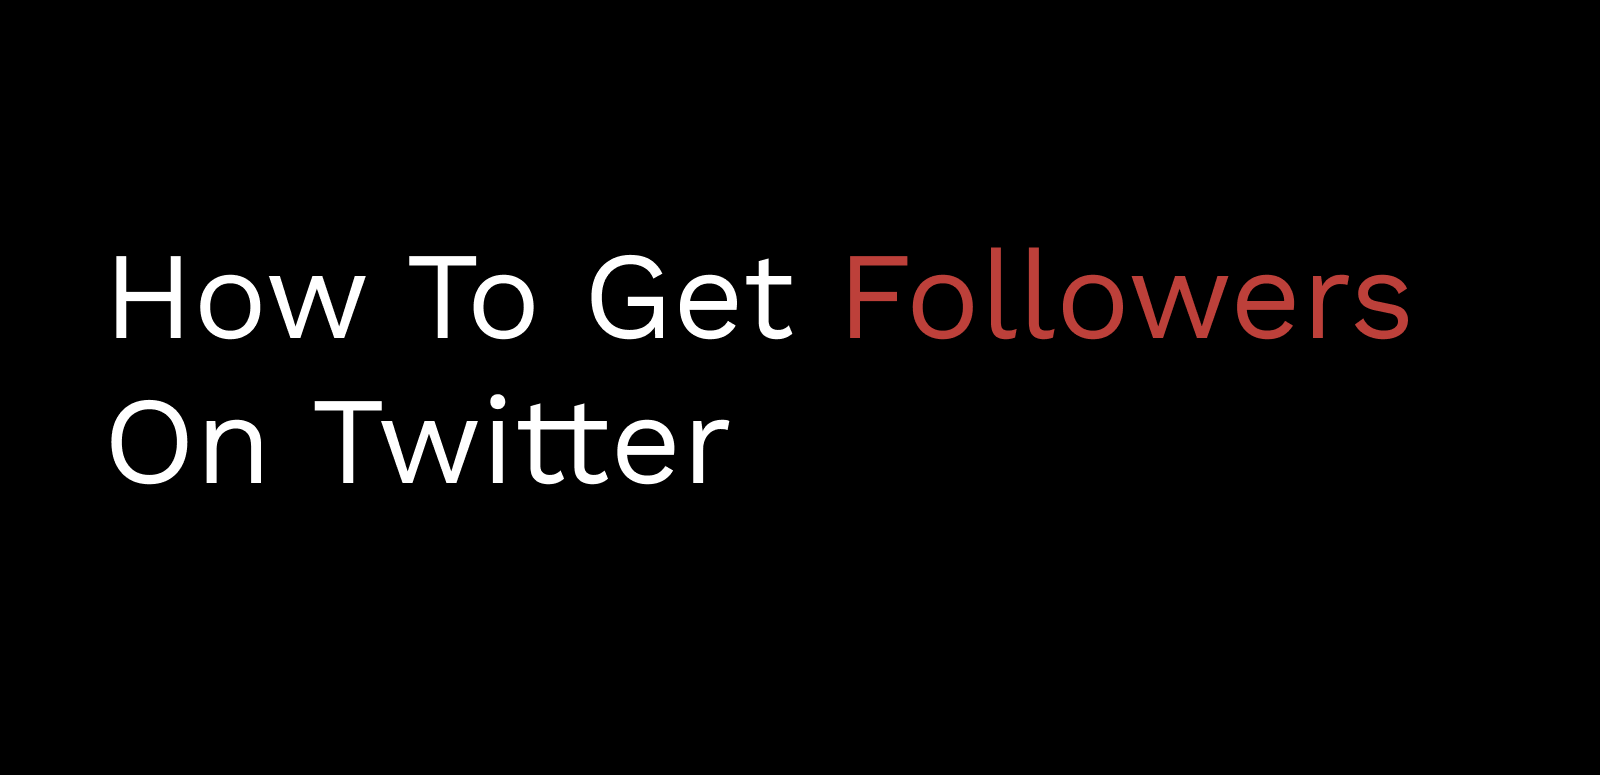 How To Get Followers On Twitter